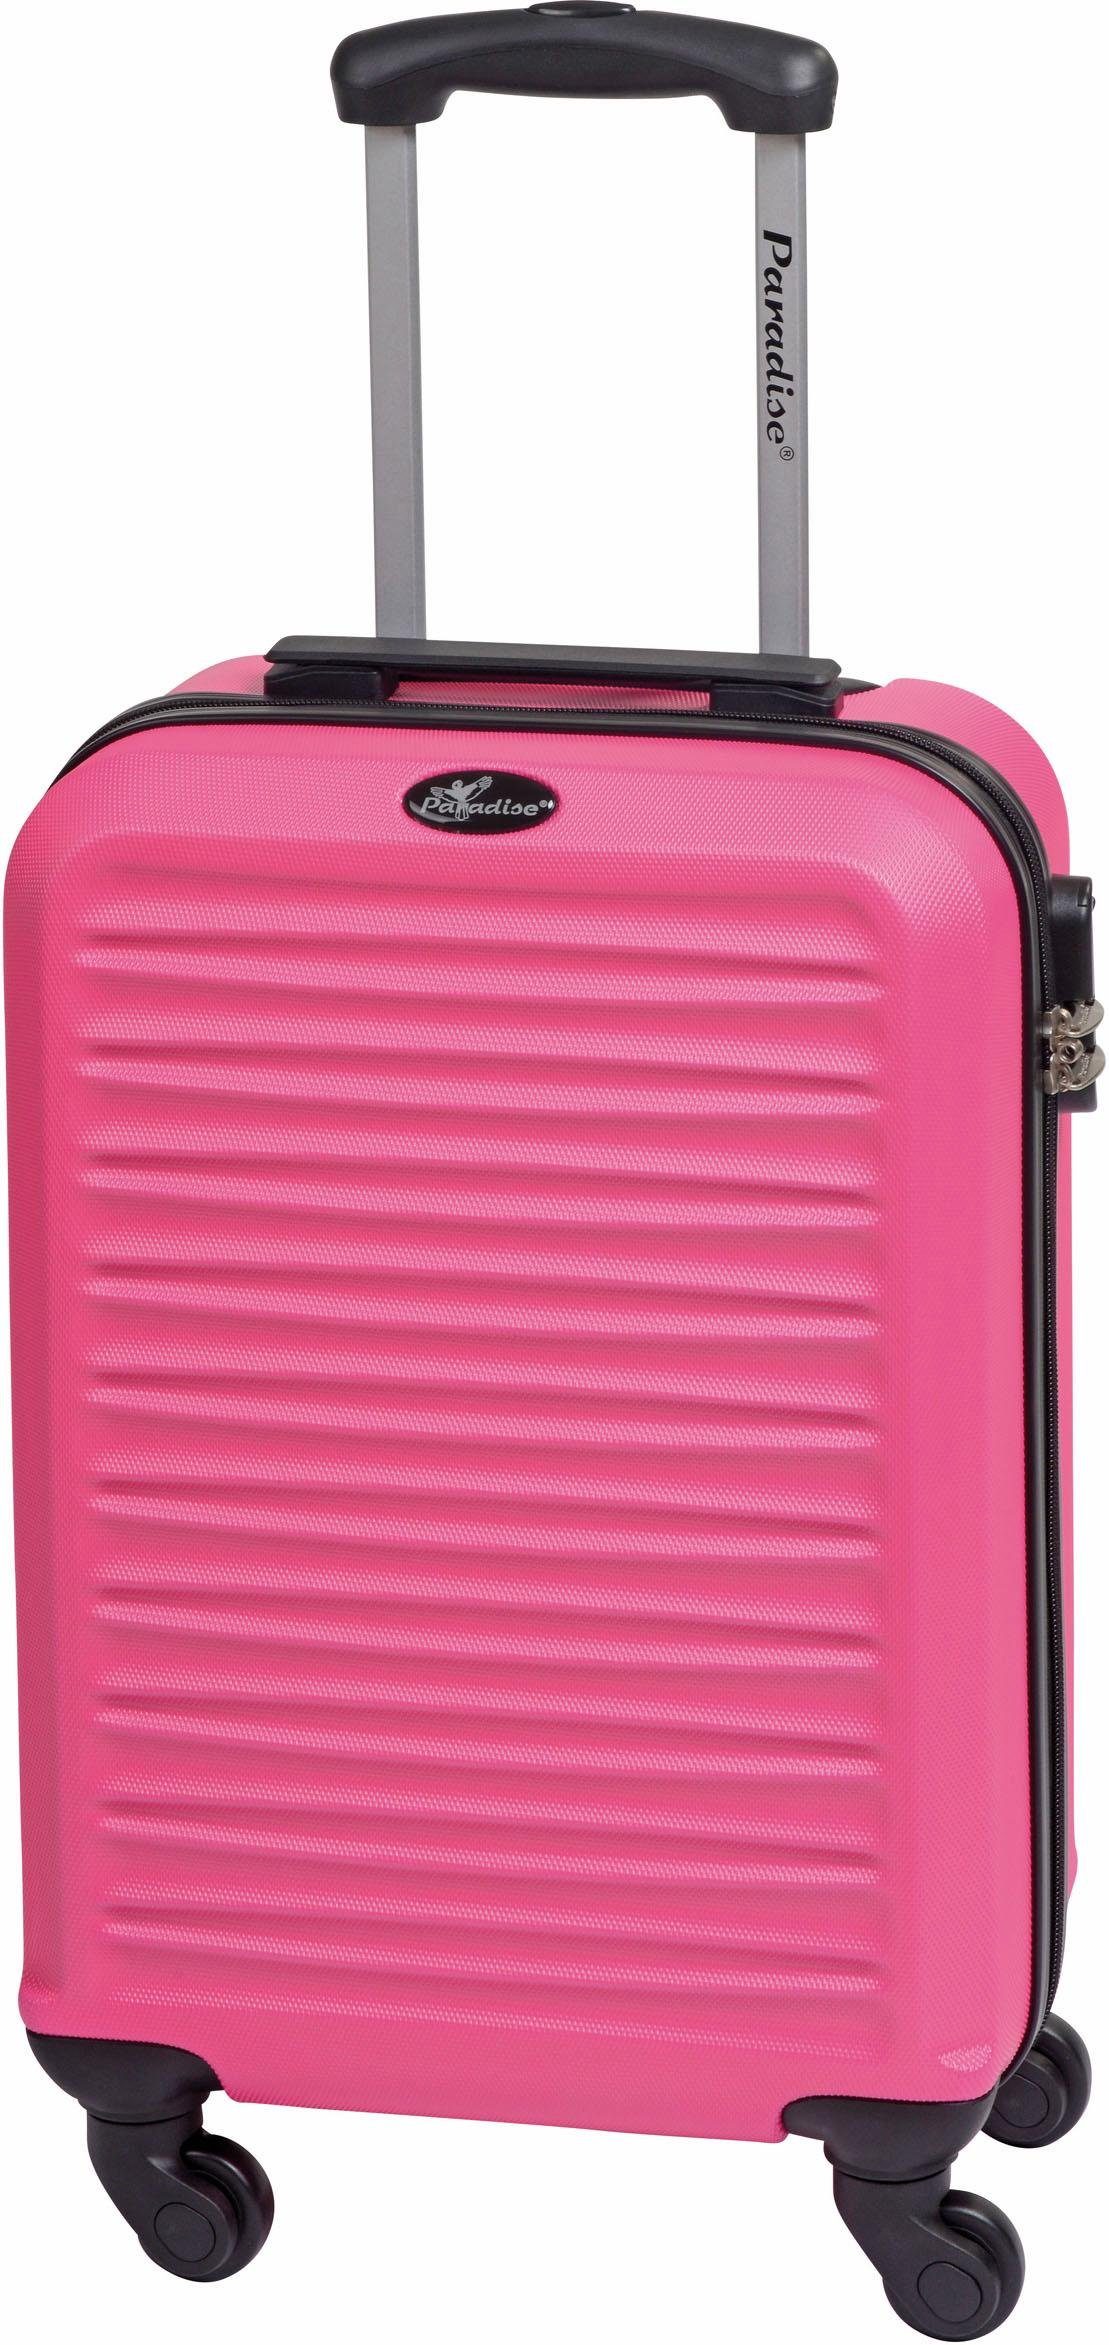 Rollen, Havanna, Trolleyset pink 3 (Set, CHECK.IN 4 tlg) by Paradise